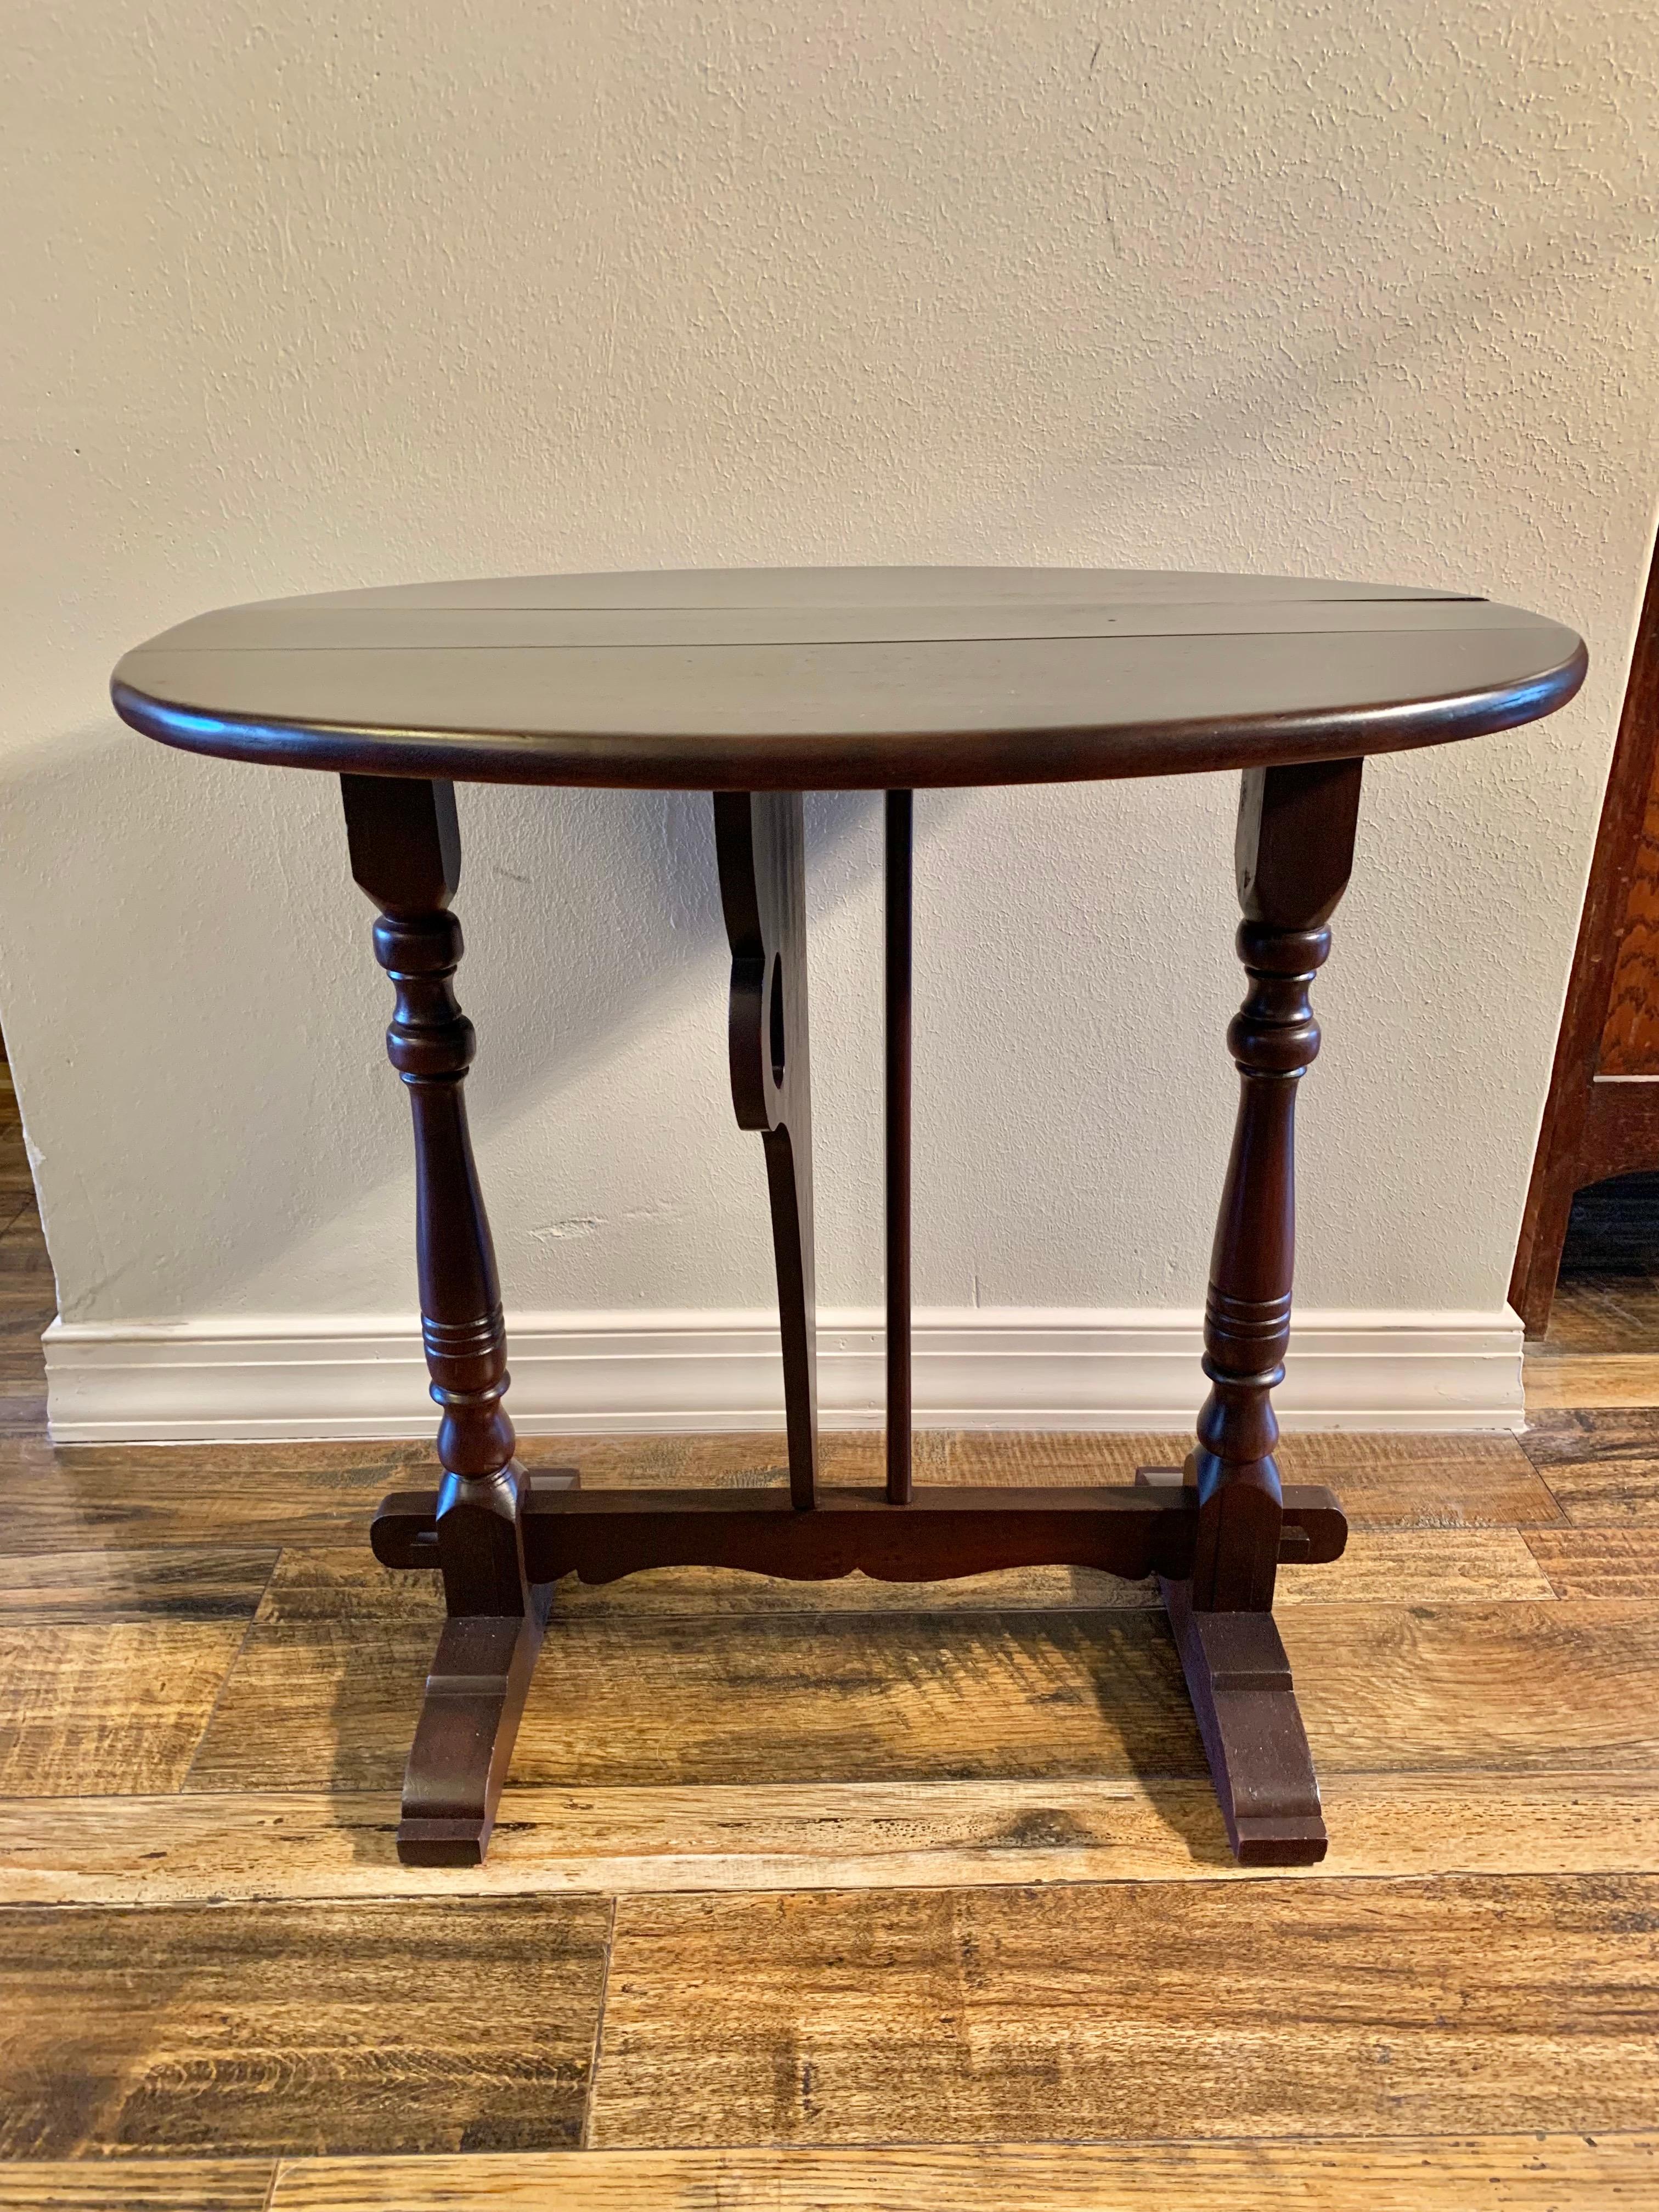 This Drop Leaf Trestle Side Table was crafted from Walnut in the early 1900's. The piece features an oval top supported by two large wing brackets in the shape of butterfly wings, which gives it it's name Butterfly Drop Leaf. The wing brackets swing